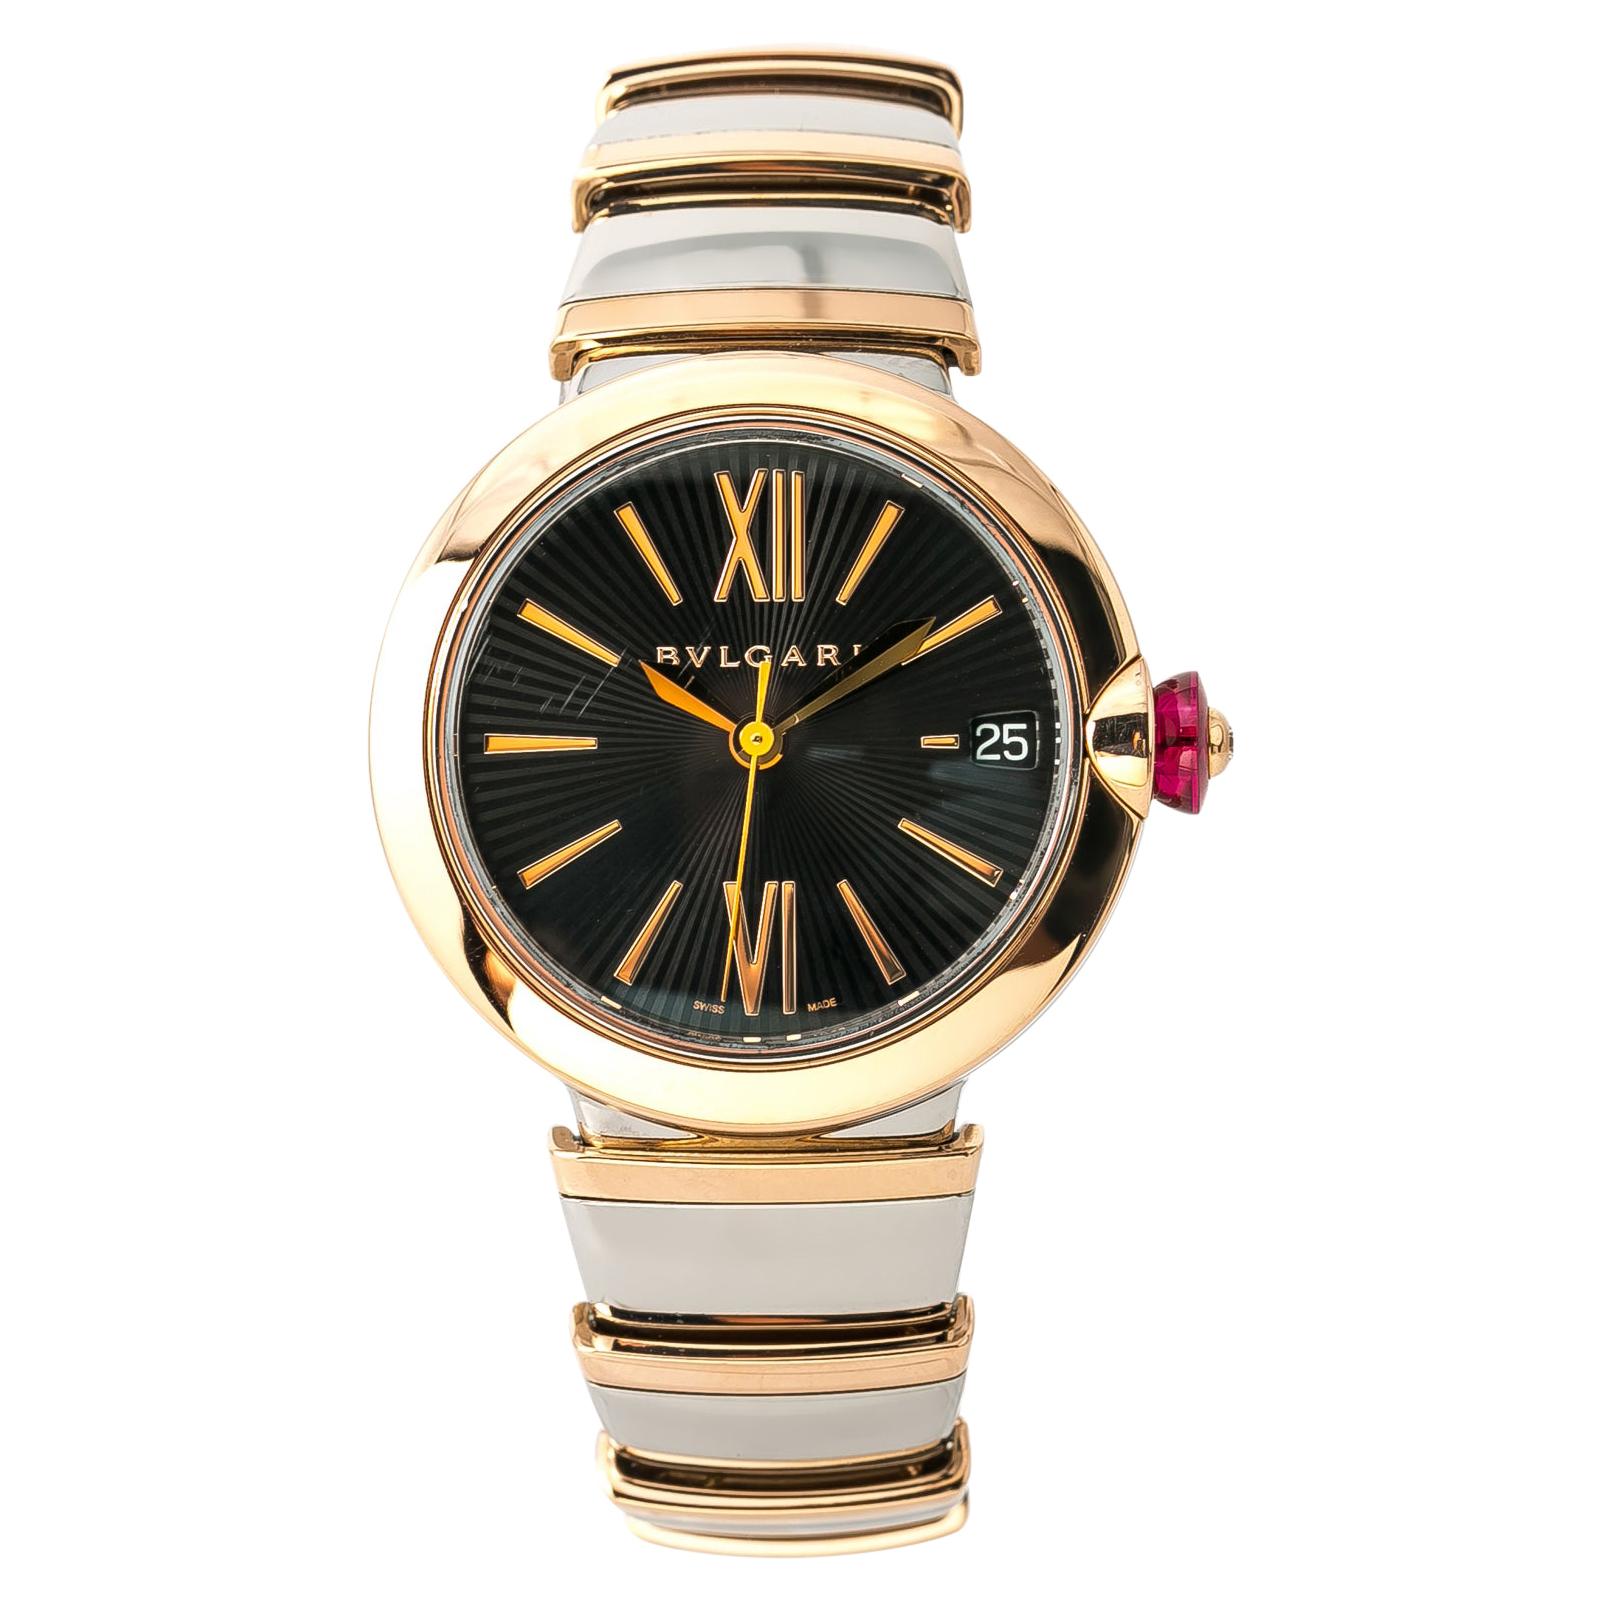 Bvlgari Lvcea LUP 33 SG Ladies Automatic Watch 18k Rose Gold Two Tone For Sale